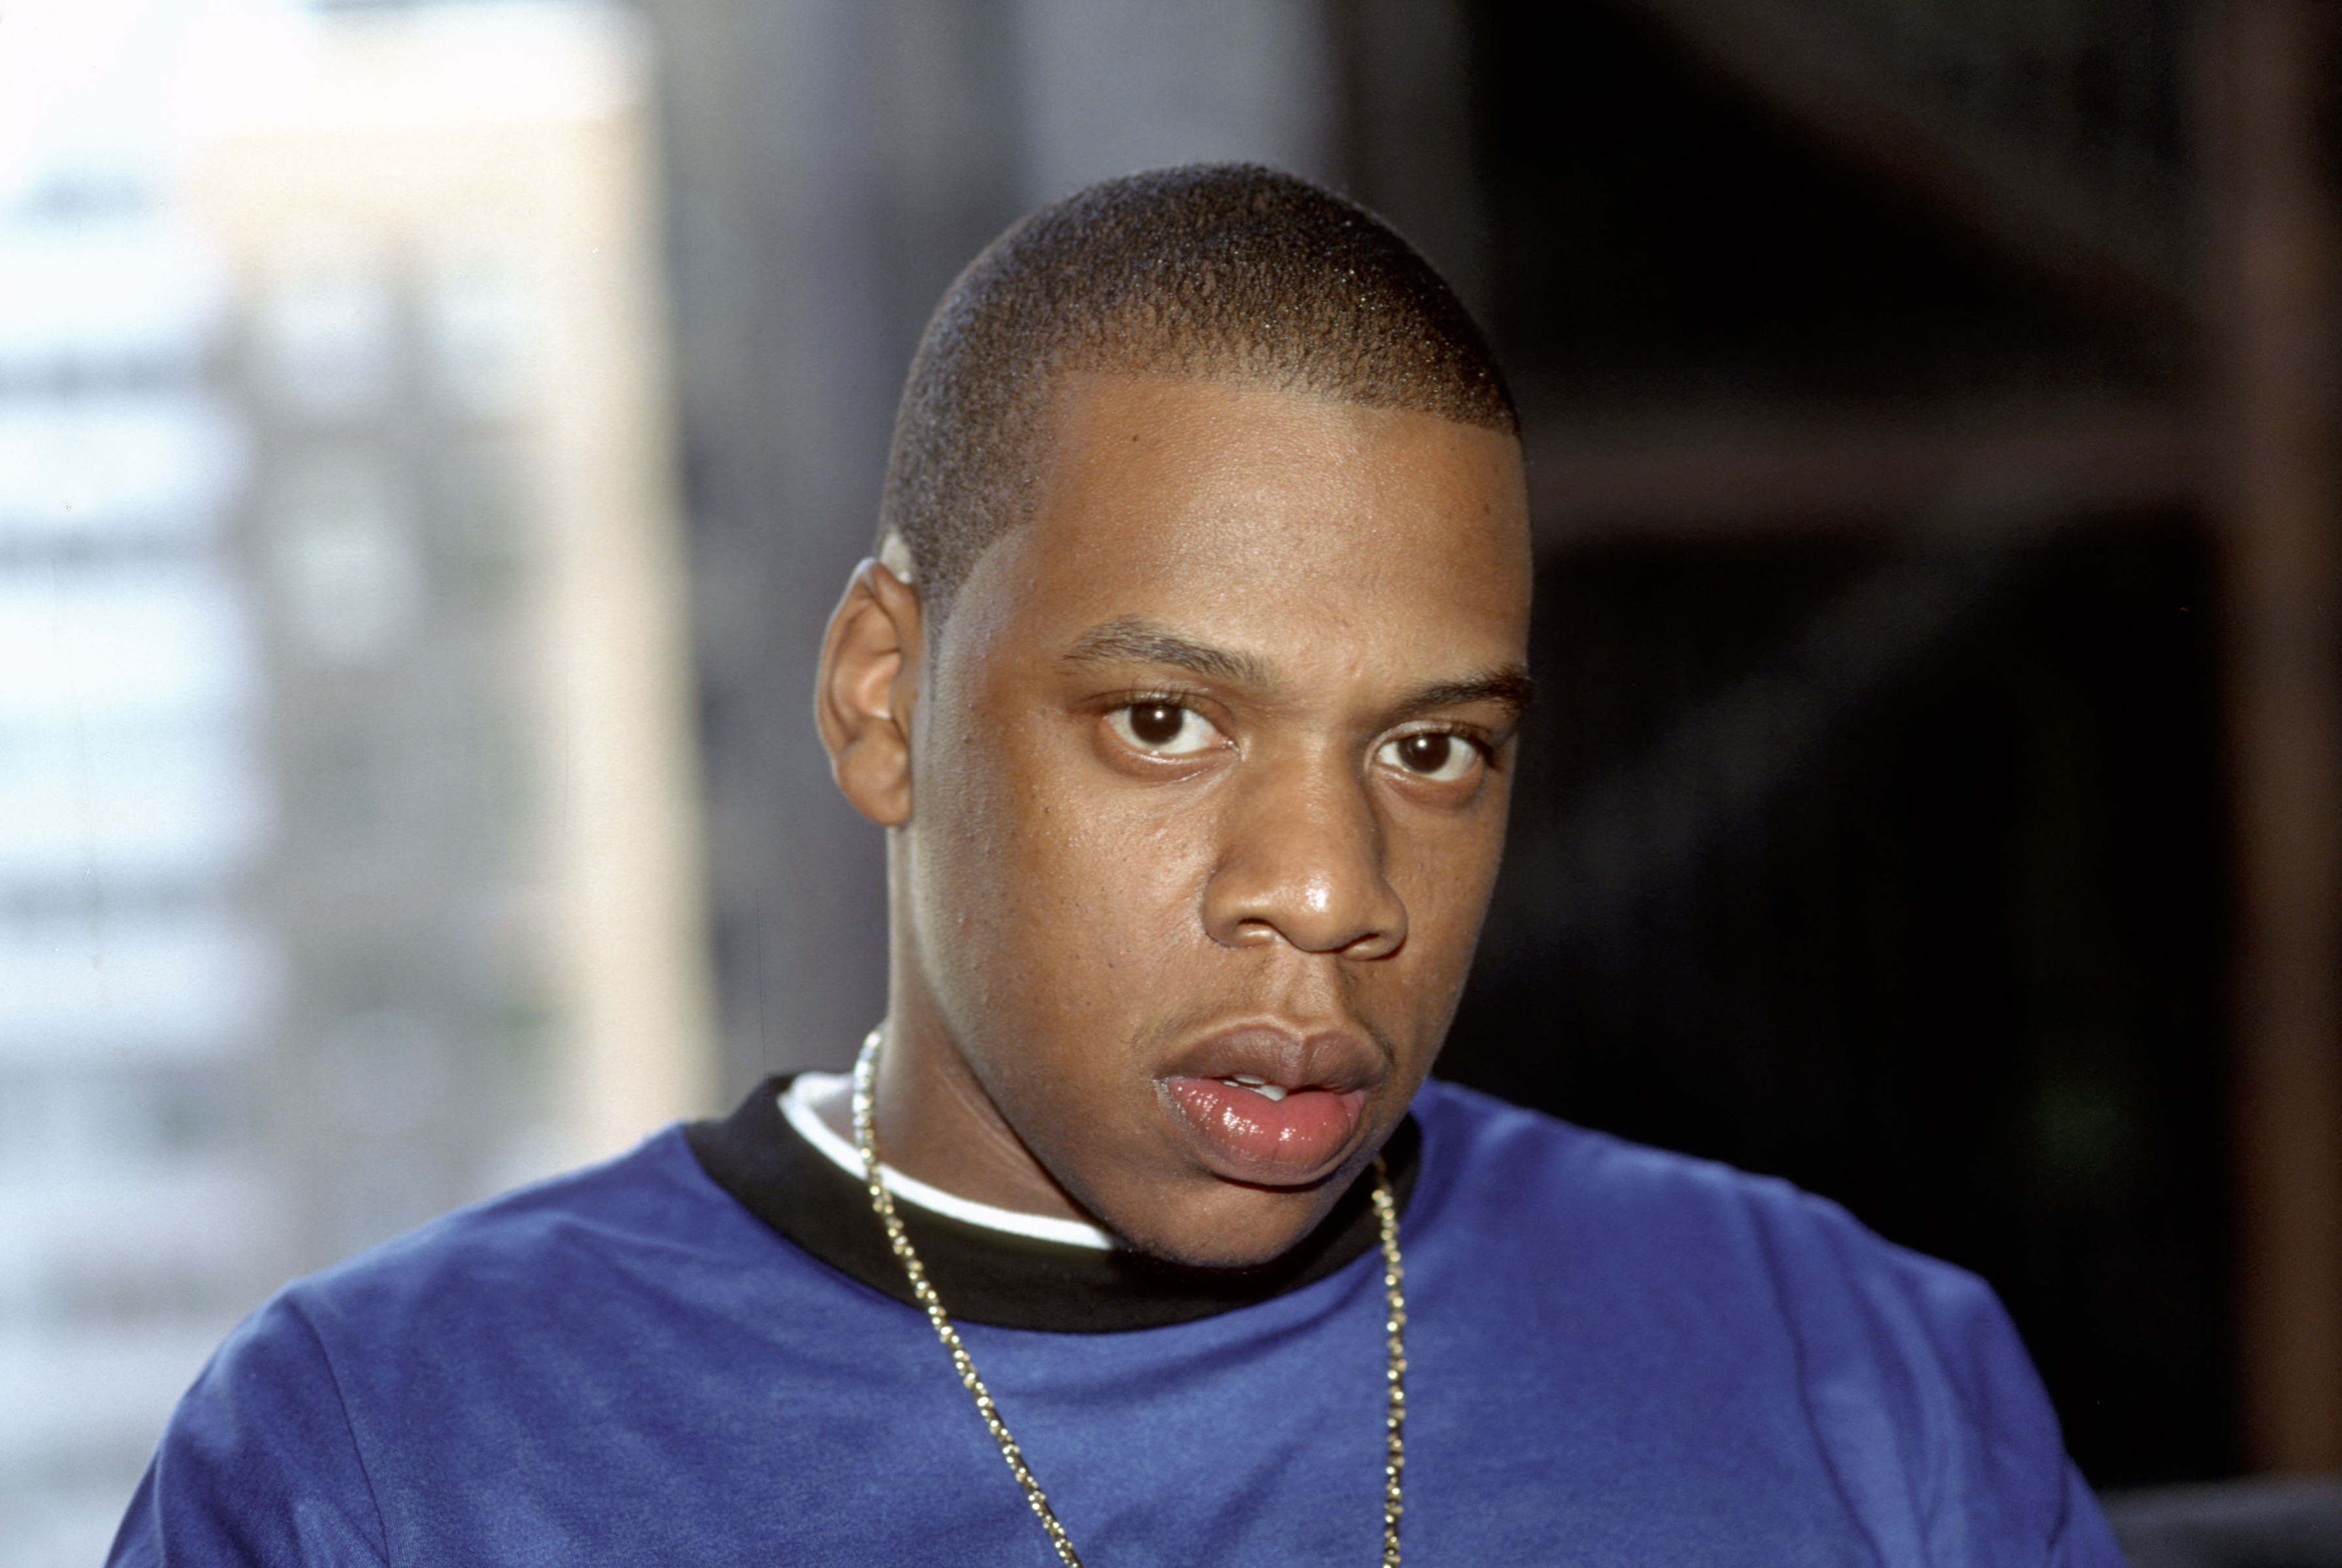 Jay-Z's rise from 'Reasonable Doubt' to 'The Blueprint